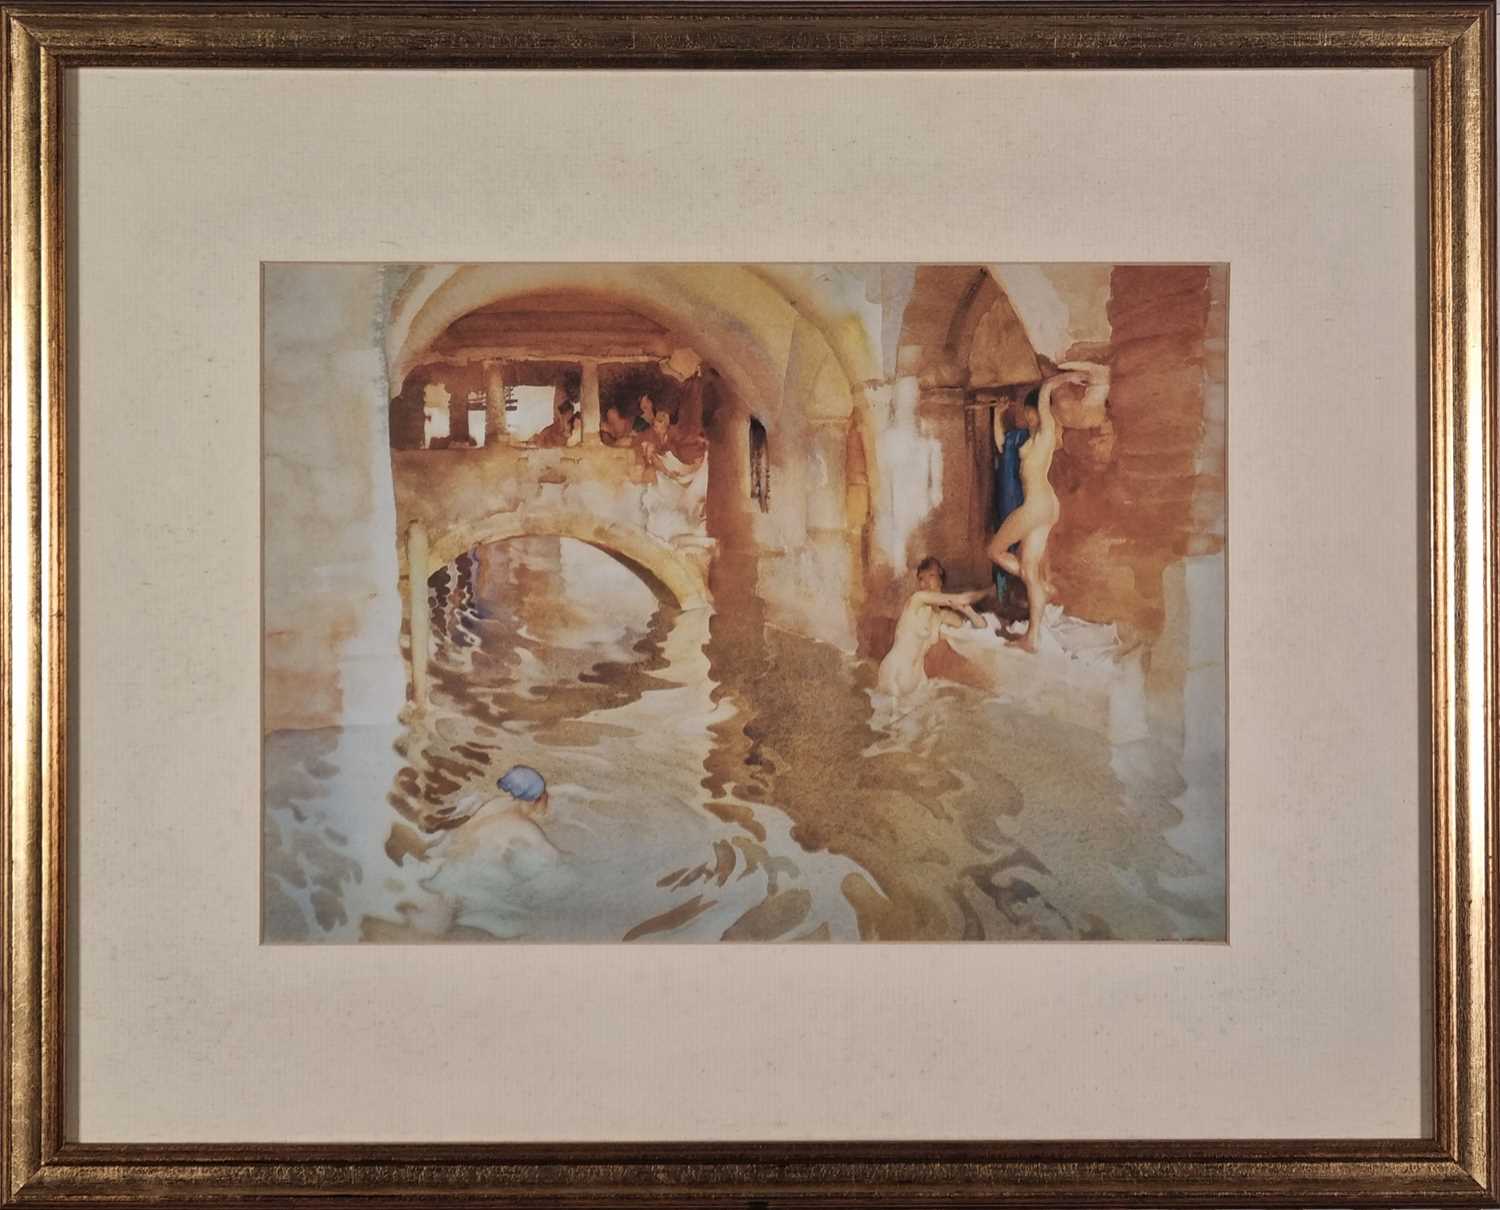 ƚ Sir William Russell FLINT (British 1880-1969) Water Arches, Colour print, 9.75" x 13.75" (24cm x - Image 2 of 9